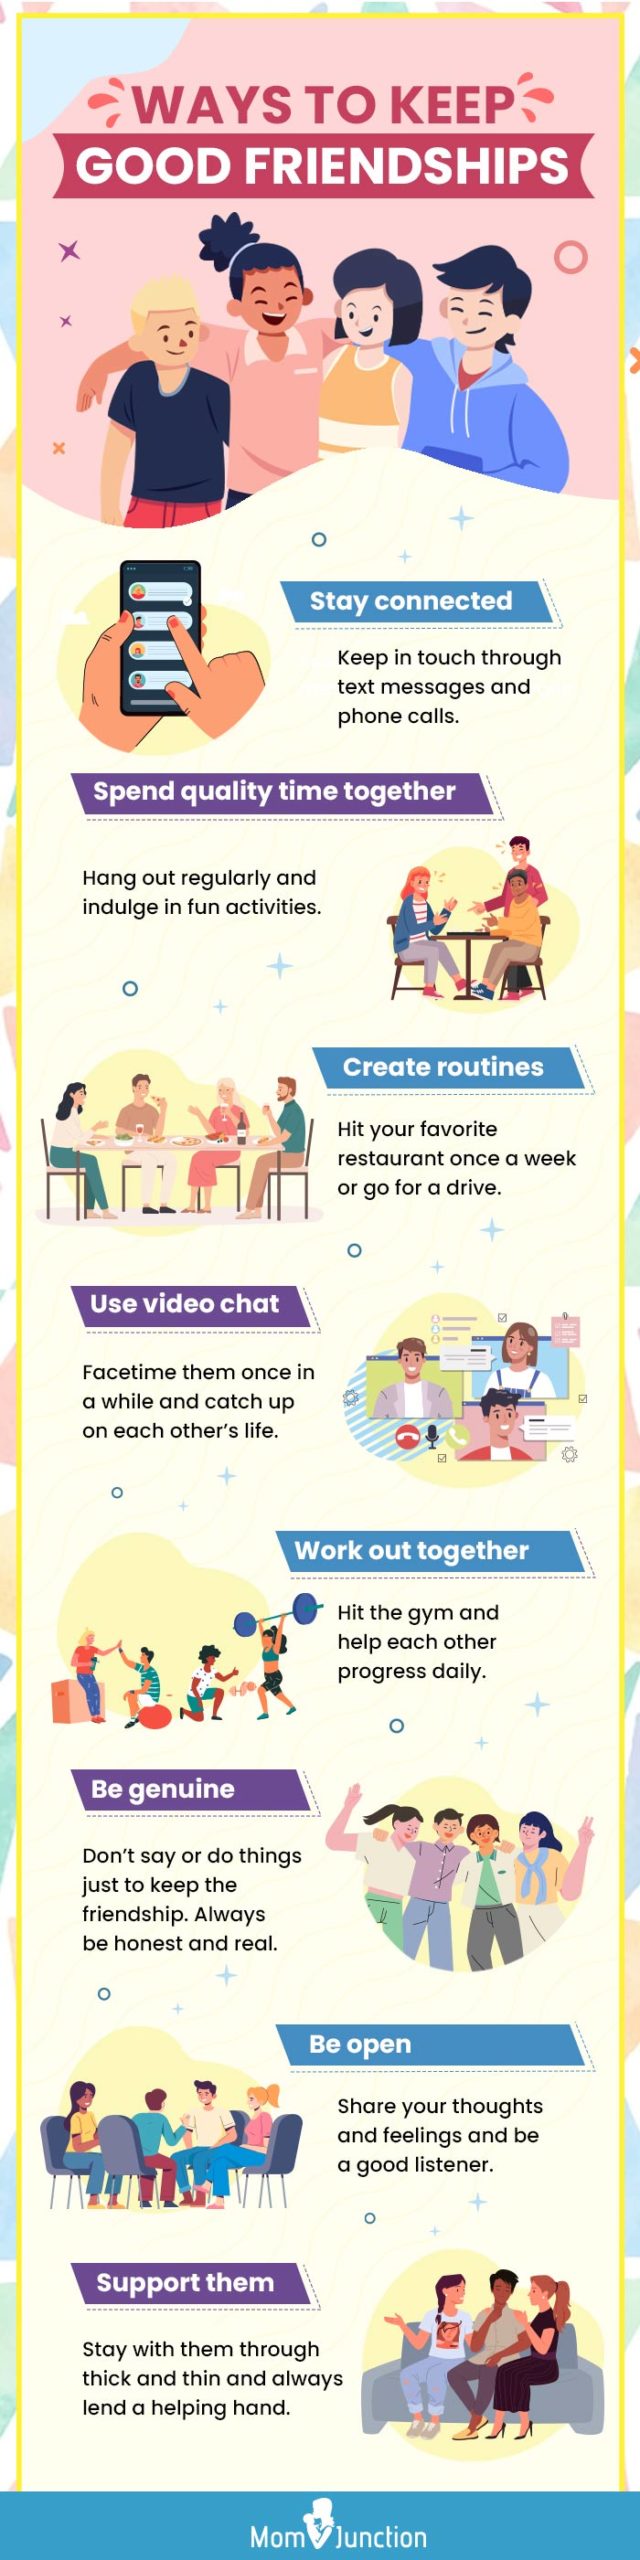 ways to keep good friendships [infographic]